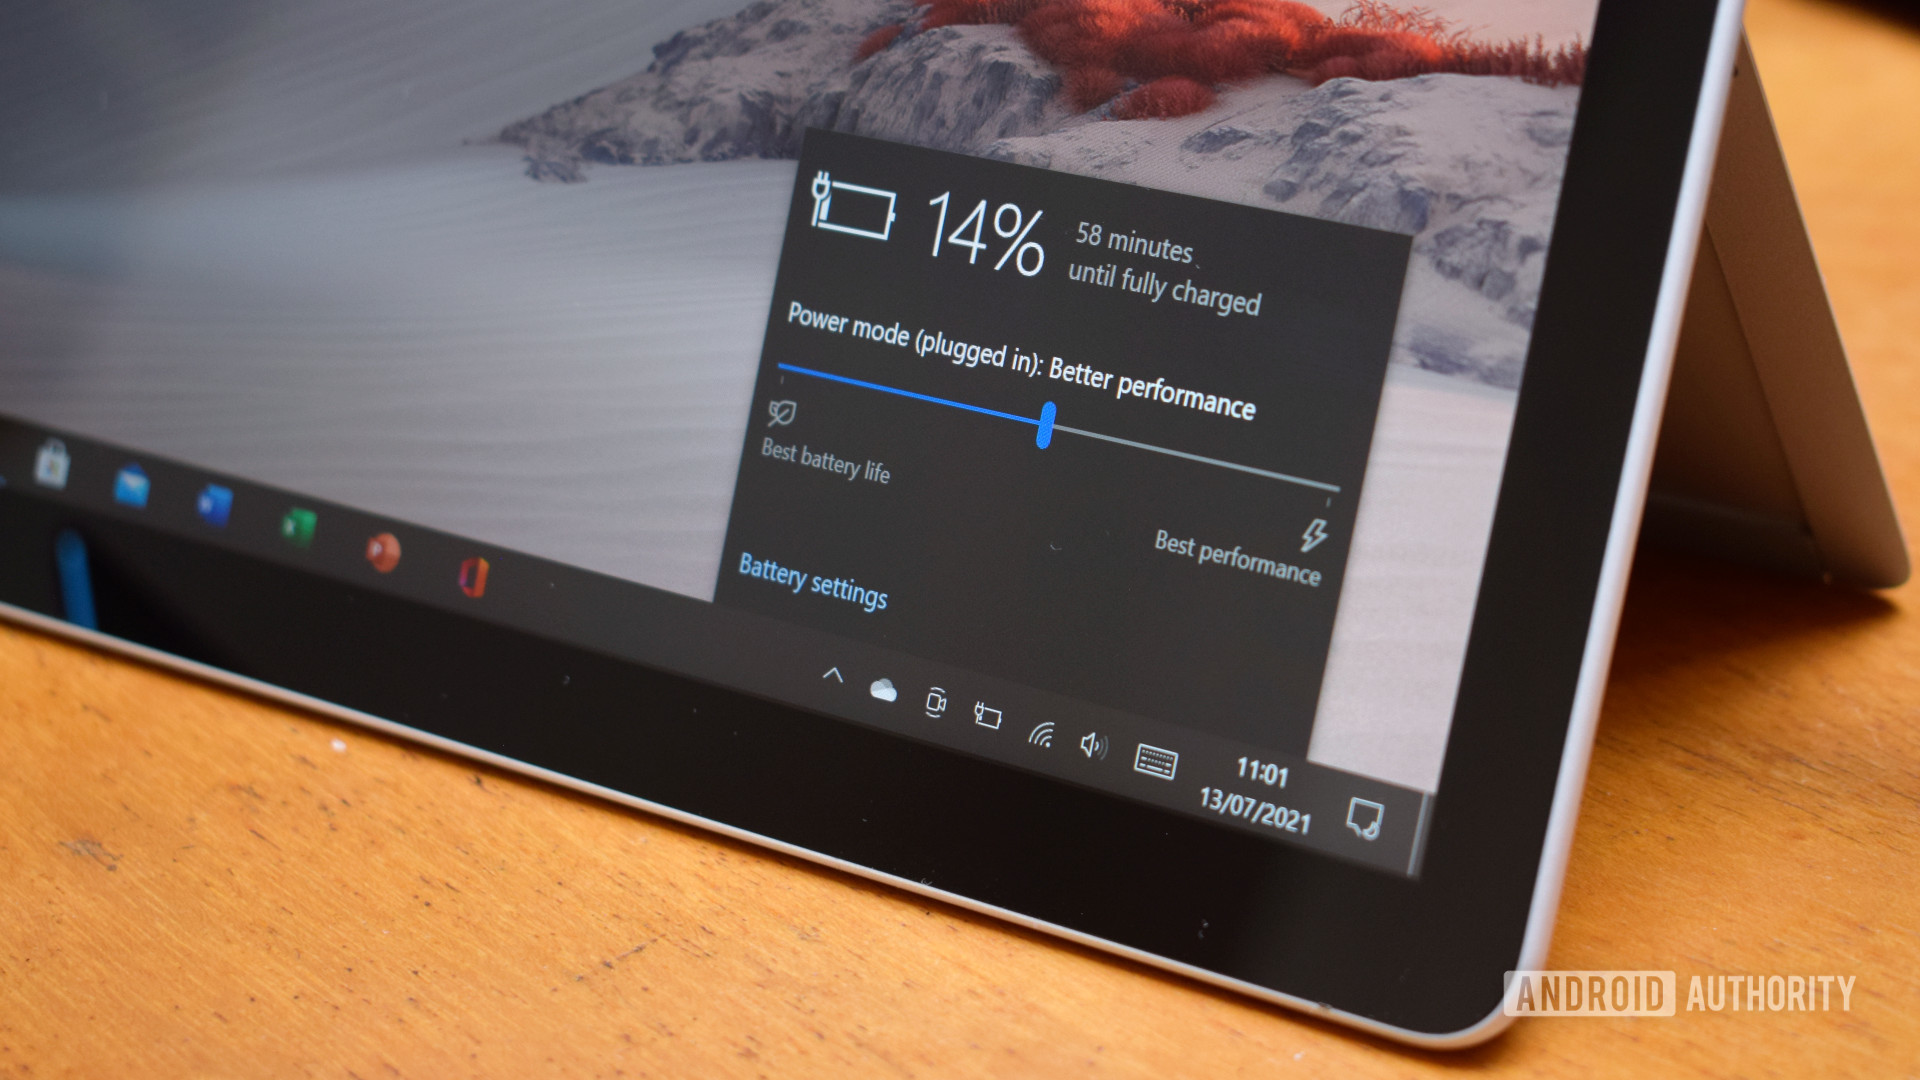 The Microsoft Surface Go 2 battery indicator showing low battery life and charging time.